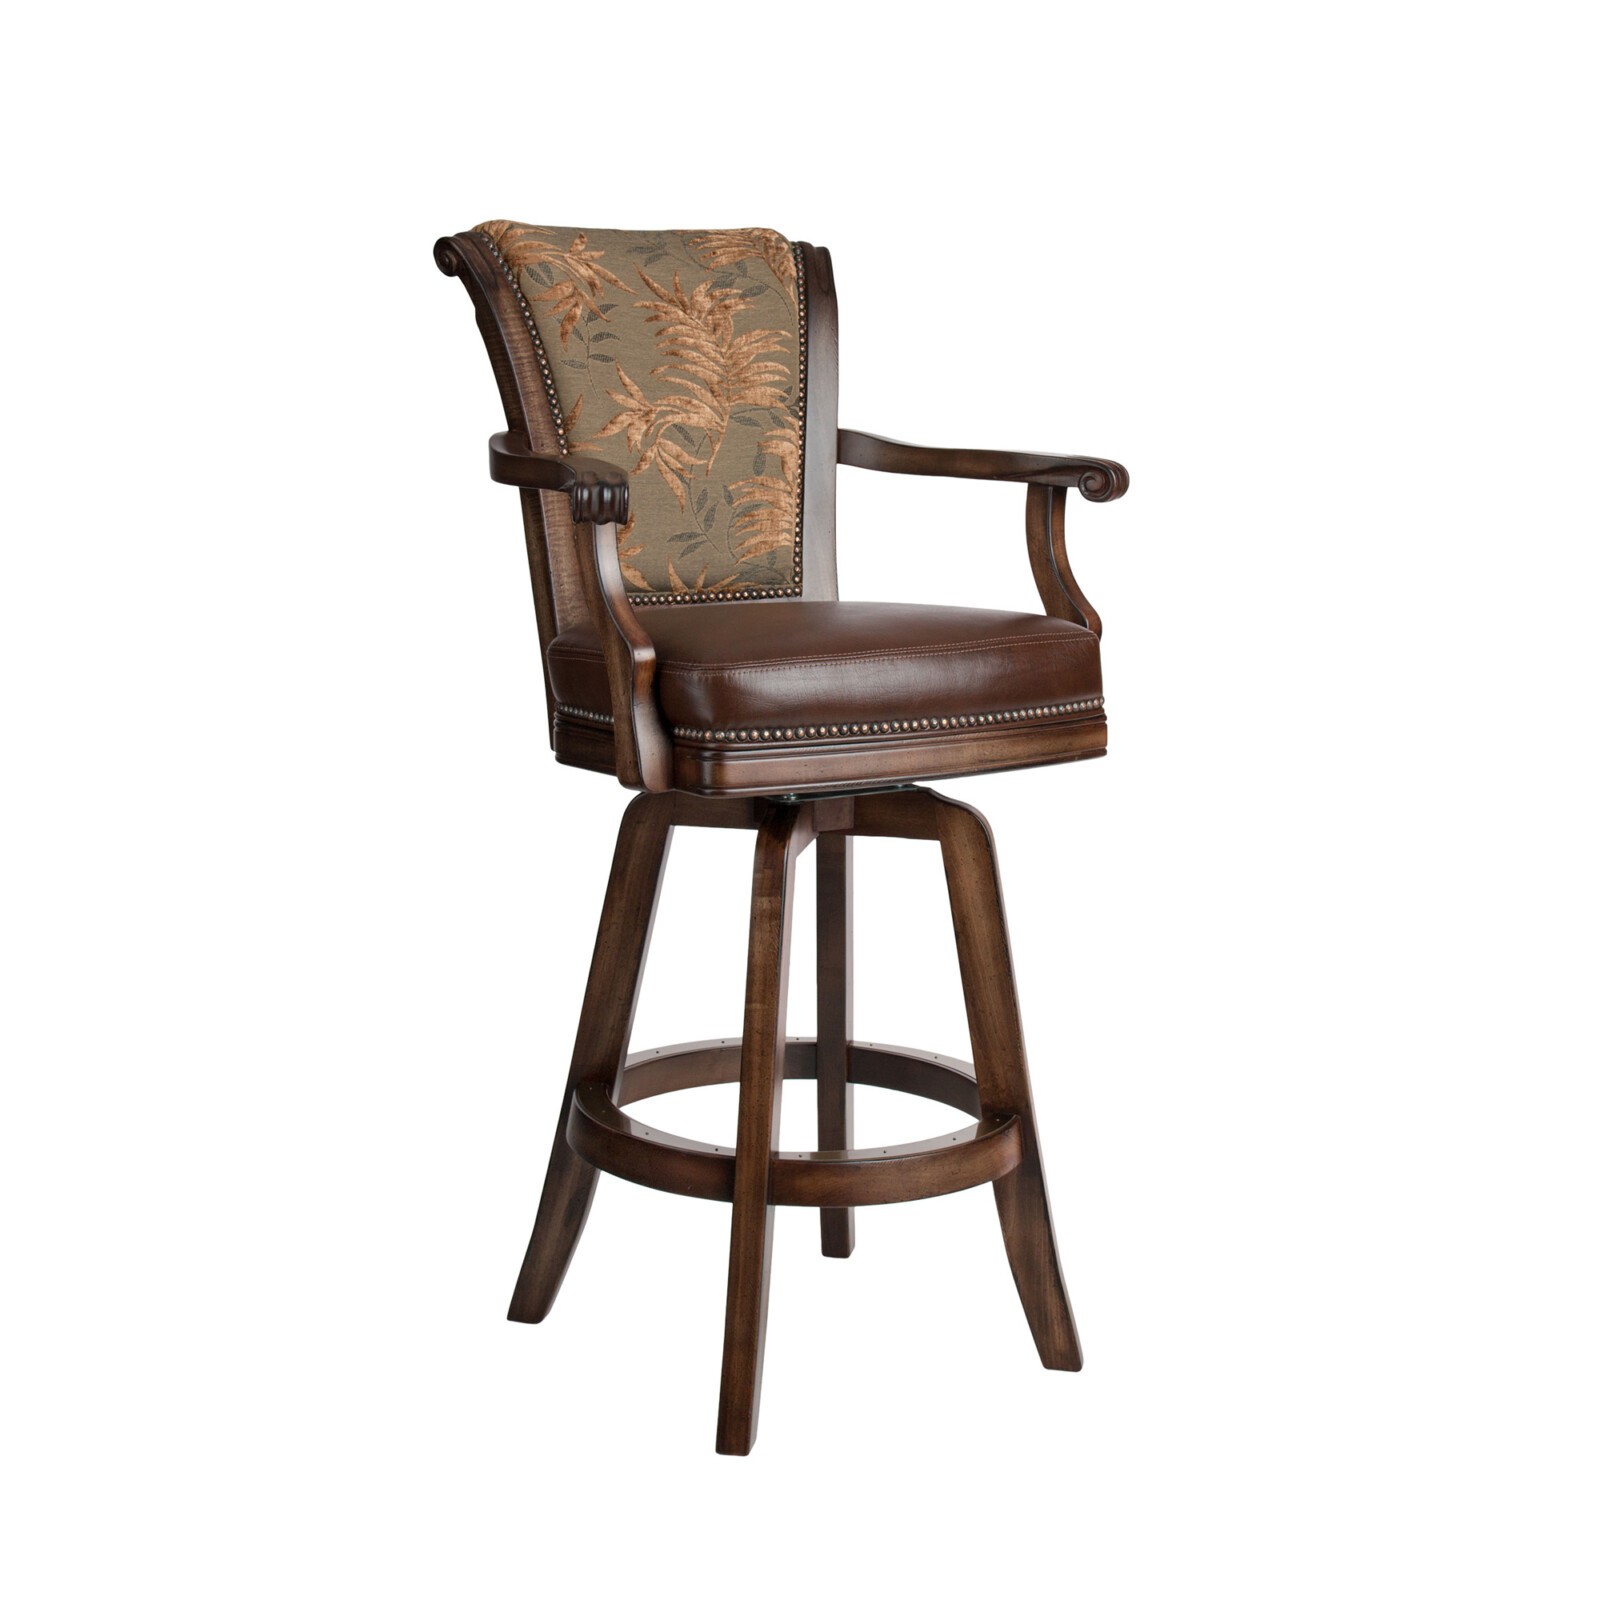 Shown In: Covering : Back Discontinued Seat: Guanaco Leather• Maple Wood Finish: Old English Distressed • Footplate Finish: Antique Brass Nail Head: Hammered Copper